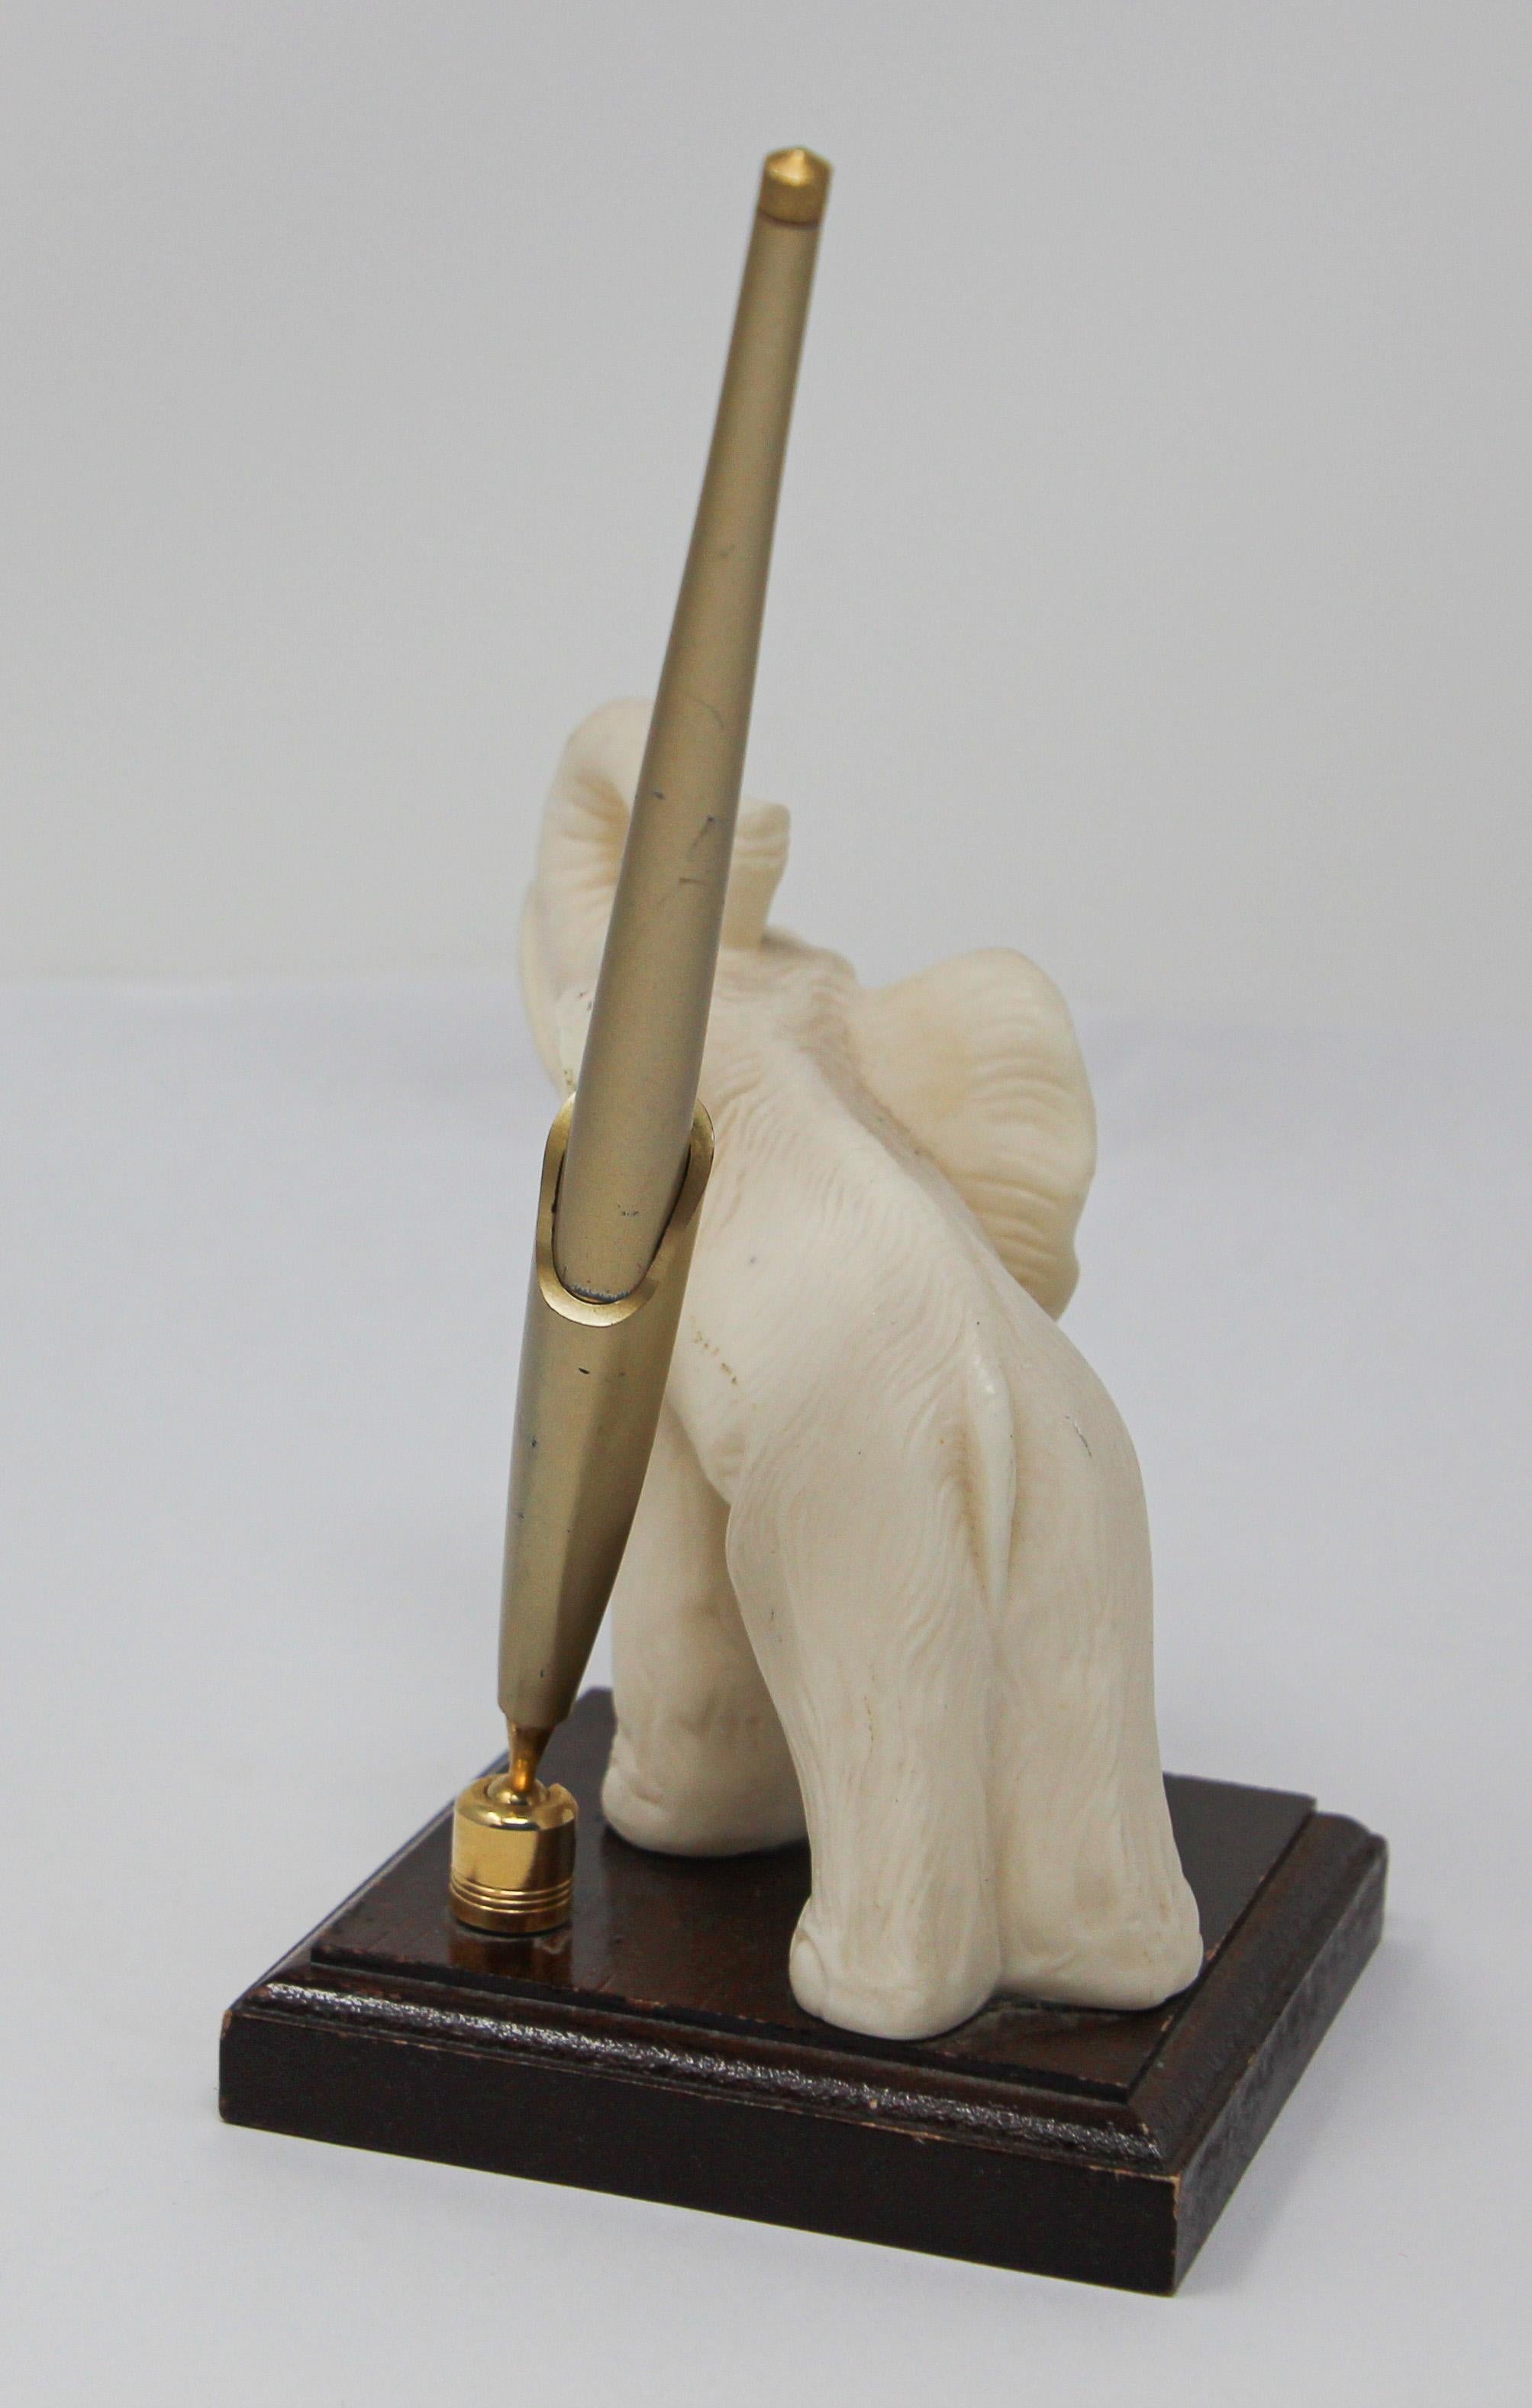 Vintage White Elephant Sculpture Pen Holder, Jaipur, Rajasthan India In Good Condition For Sale In North Hollywood, CA